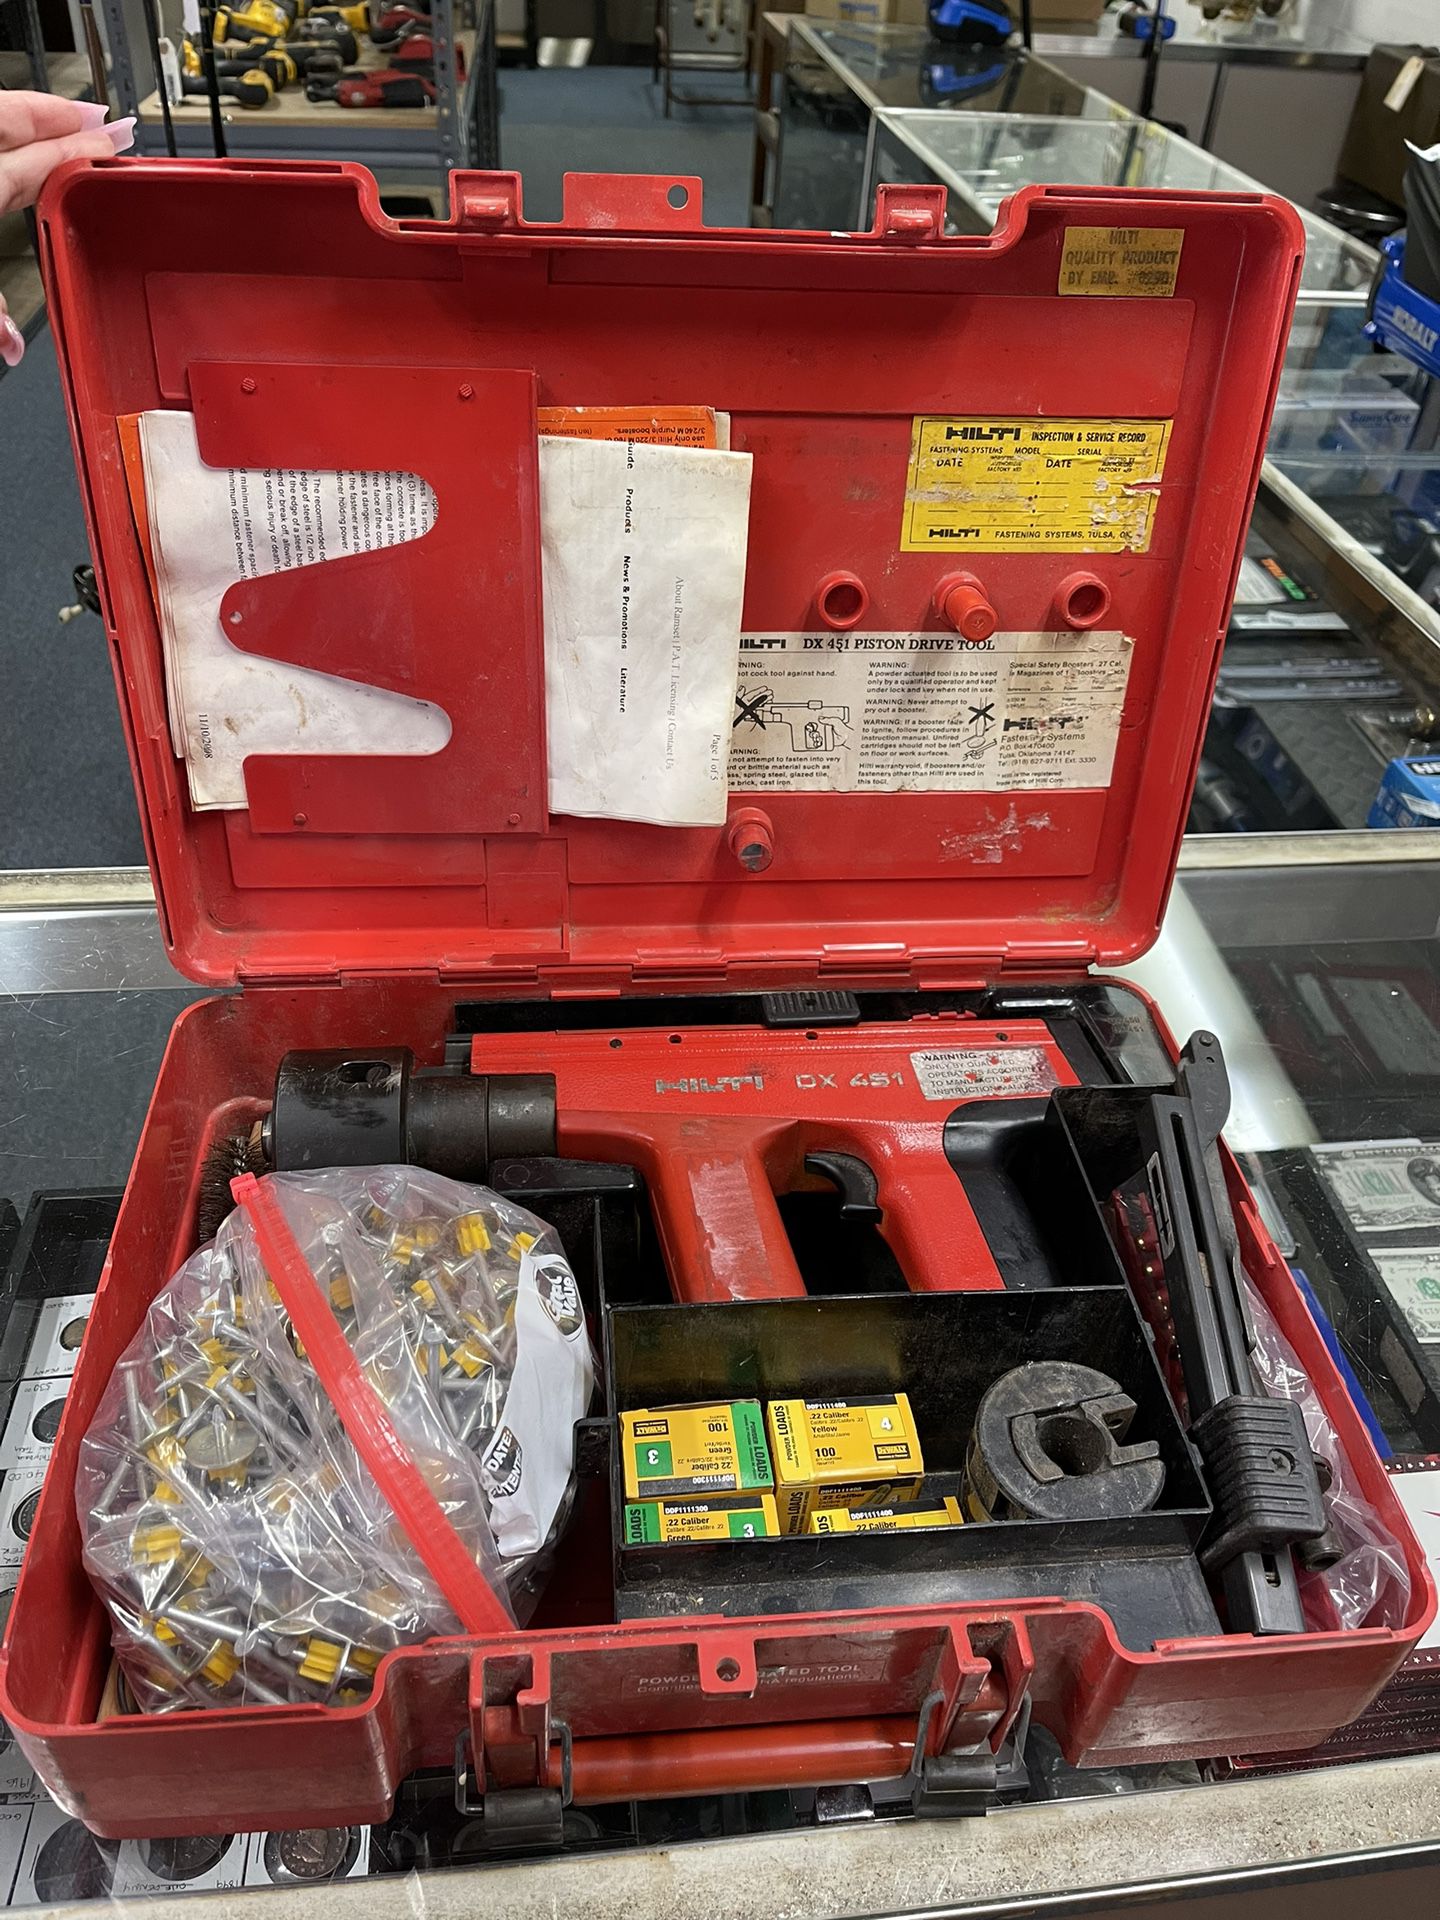 Hilti DX-451 Power Actuated Fastener Nail Gun Tool With Accessories & Case